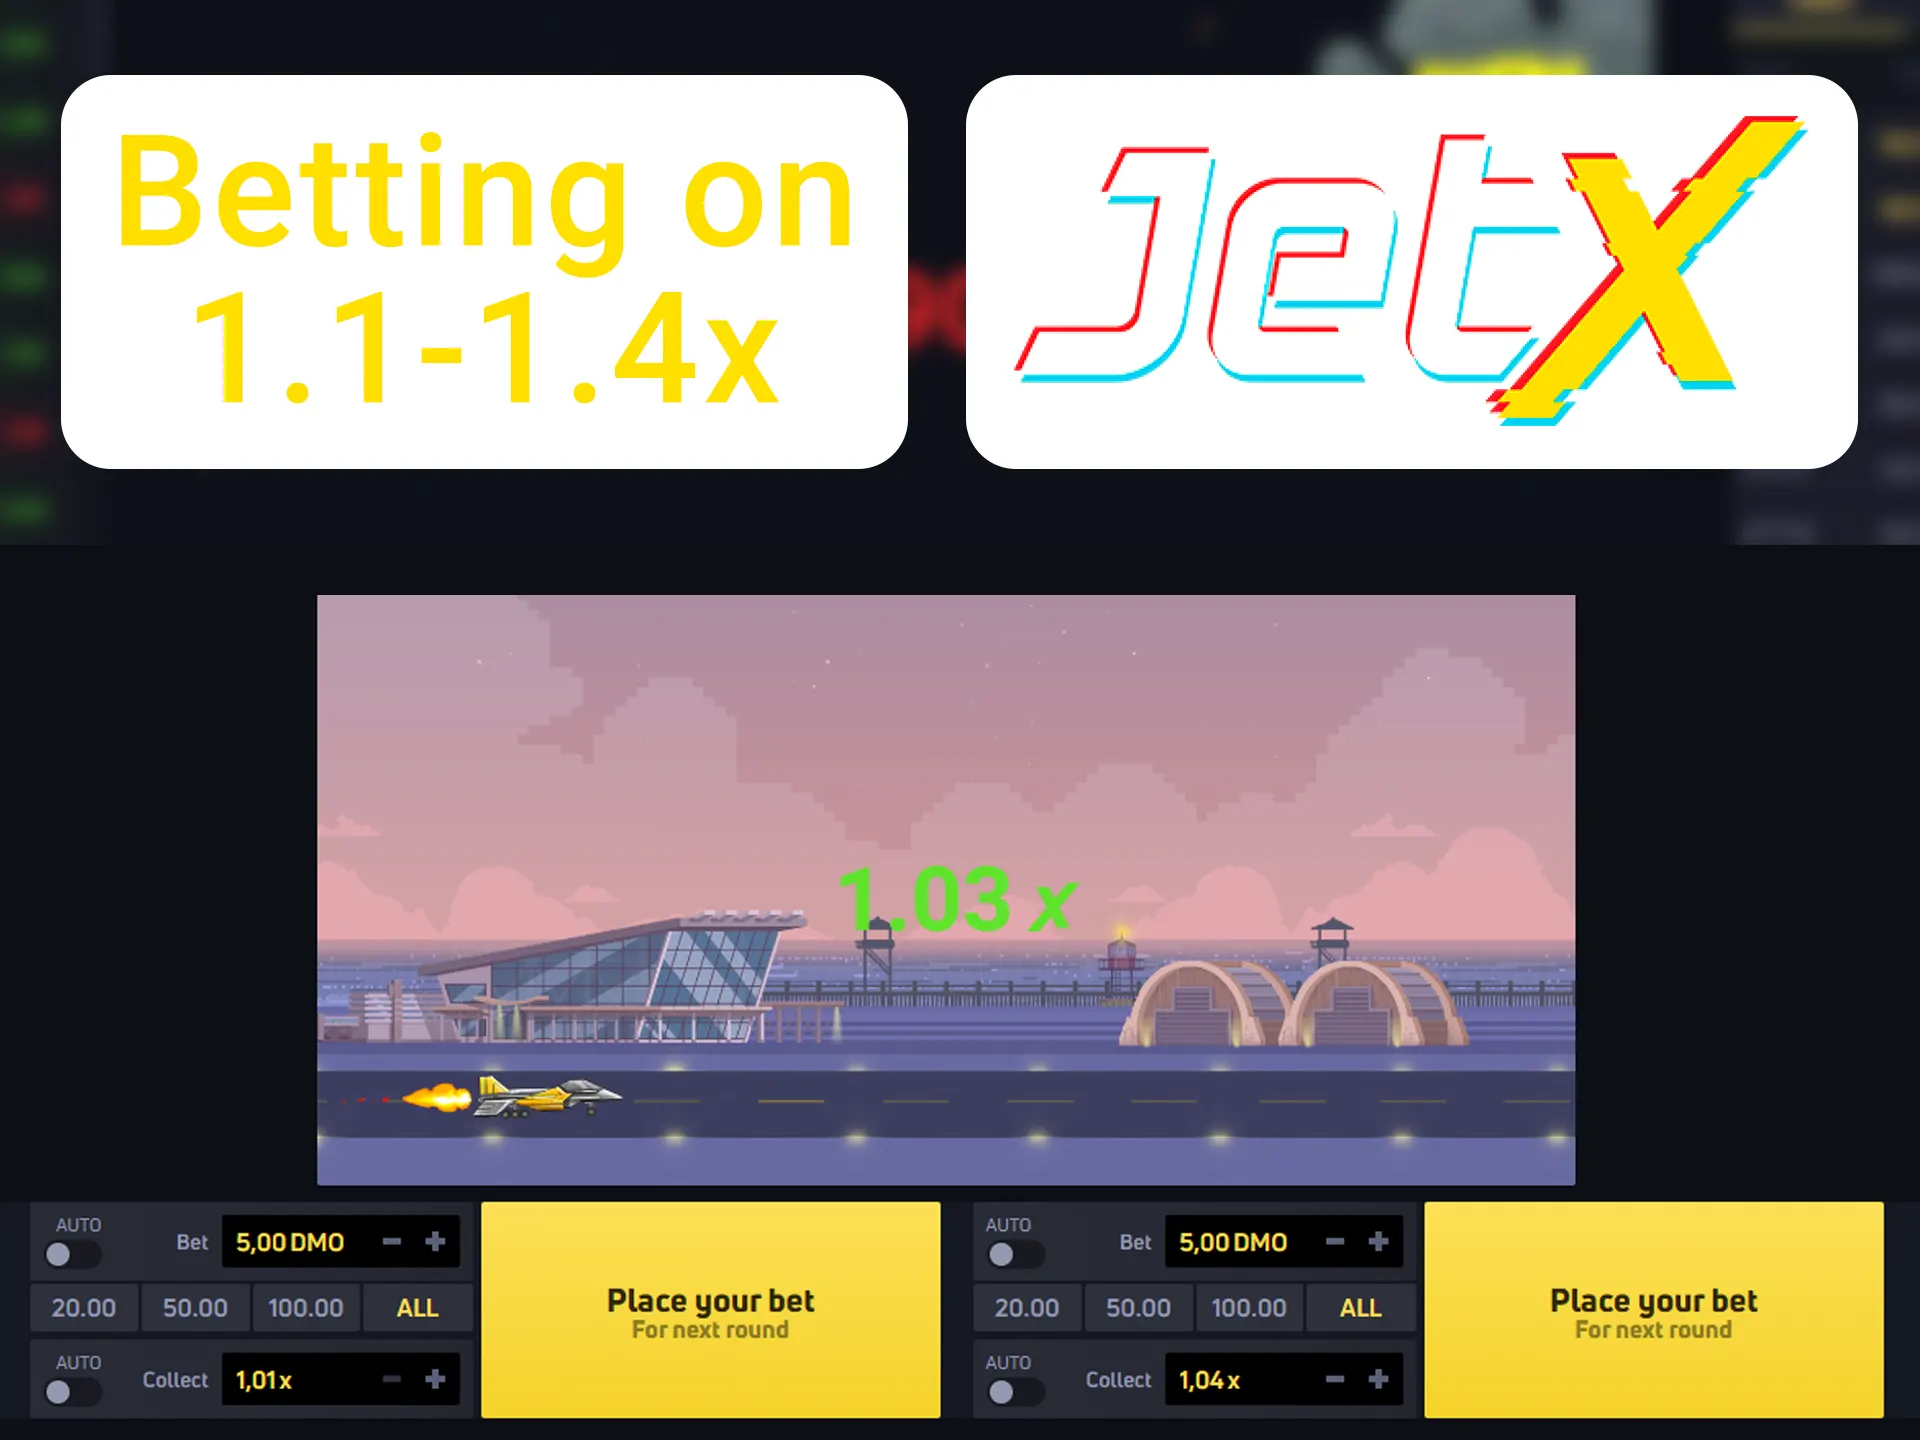 Bet on smaller coefficients when playing JetX.